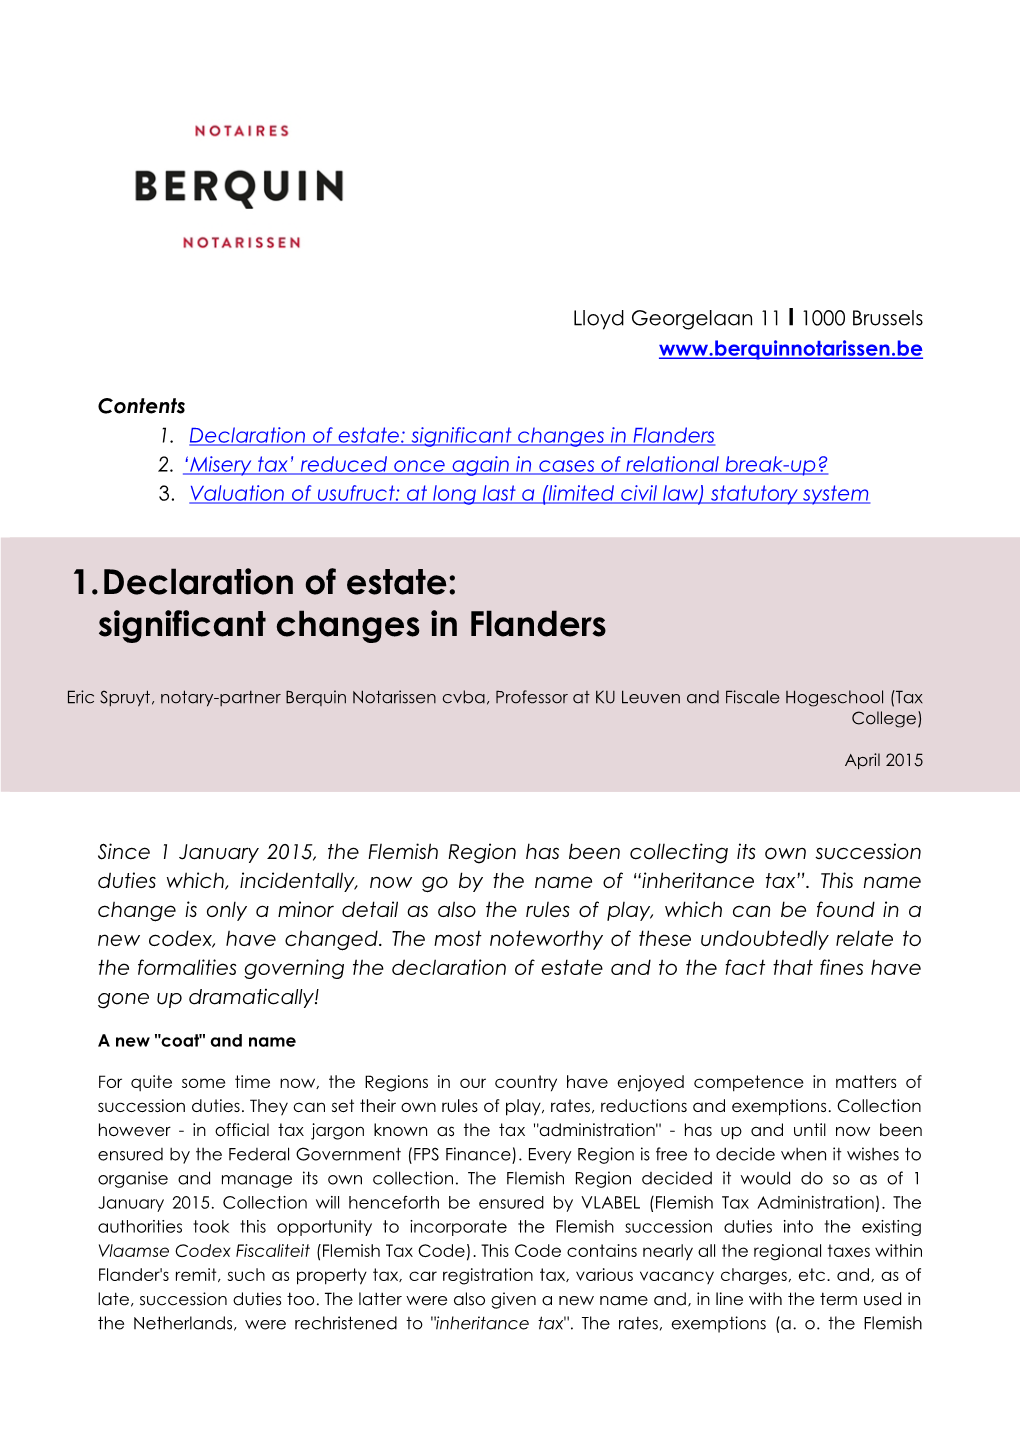 1.Declaration of Estate: Significant Changes in Flanders